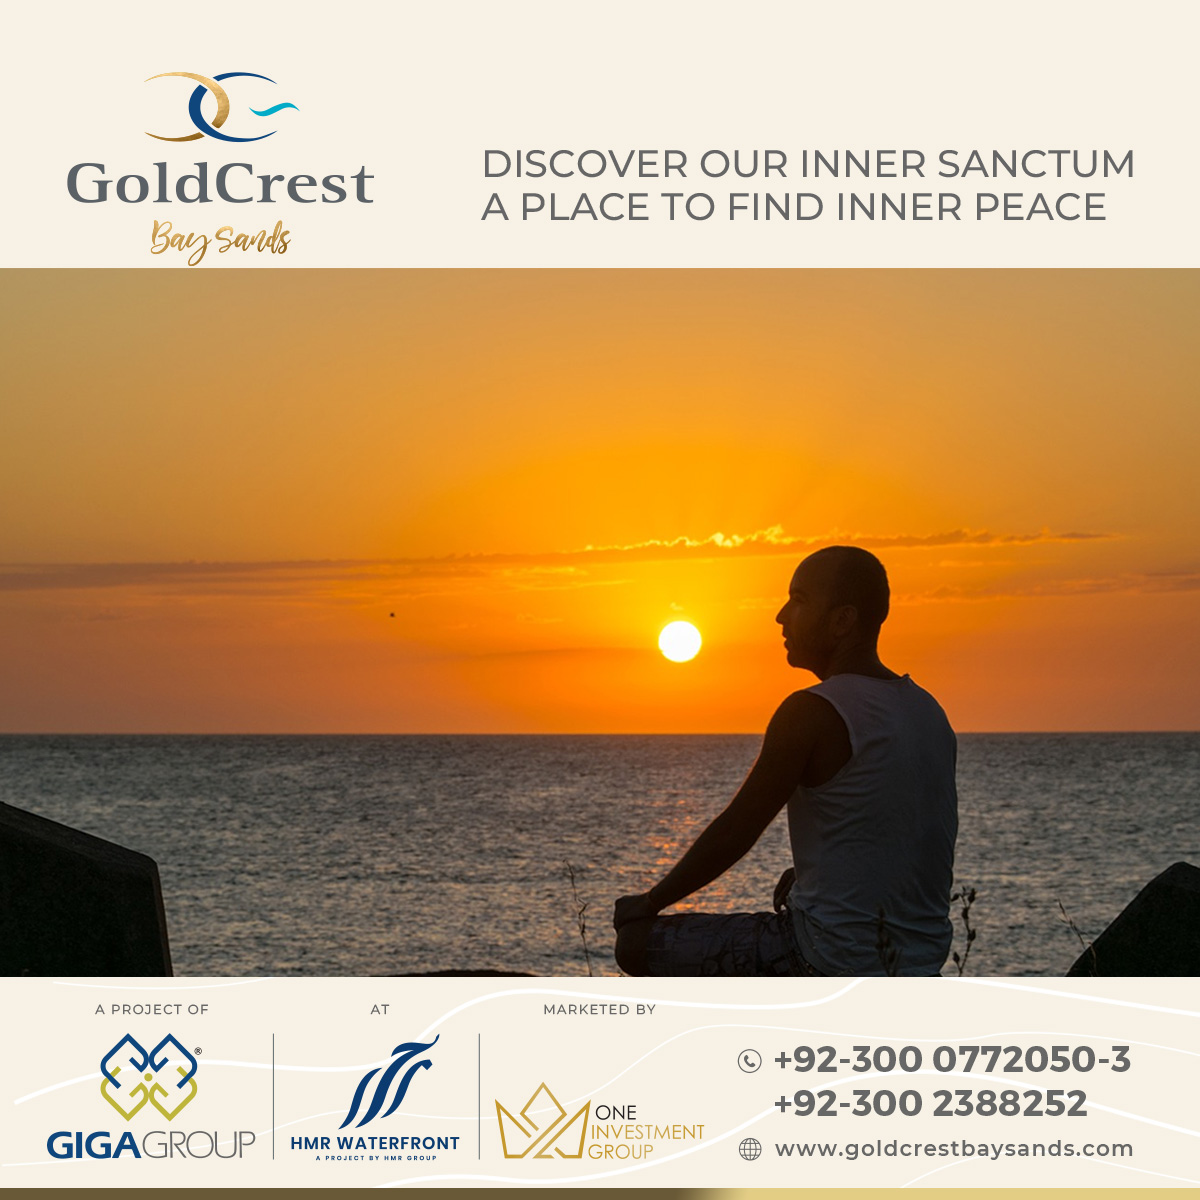 Journey to Tranquility! Find Inner Peace by the Shoreline at Goldcrest Bay Sands. Your Sanctuary of Serenity, Goldcrest Bay Sands Coming Soon!

#goldcrestbaysands #gigagroup #hmrwaterfront #karachi #dhaphase8 #innerpeace #SanctuaryOfSerenity #PropertyInvestment